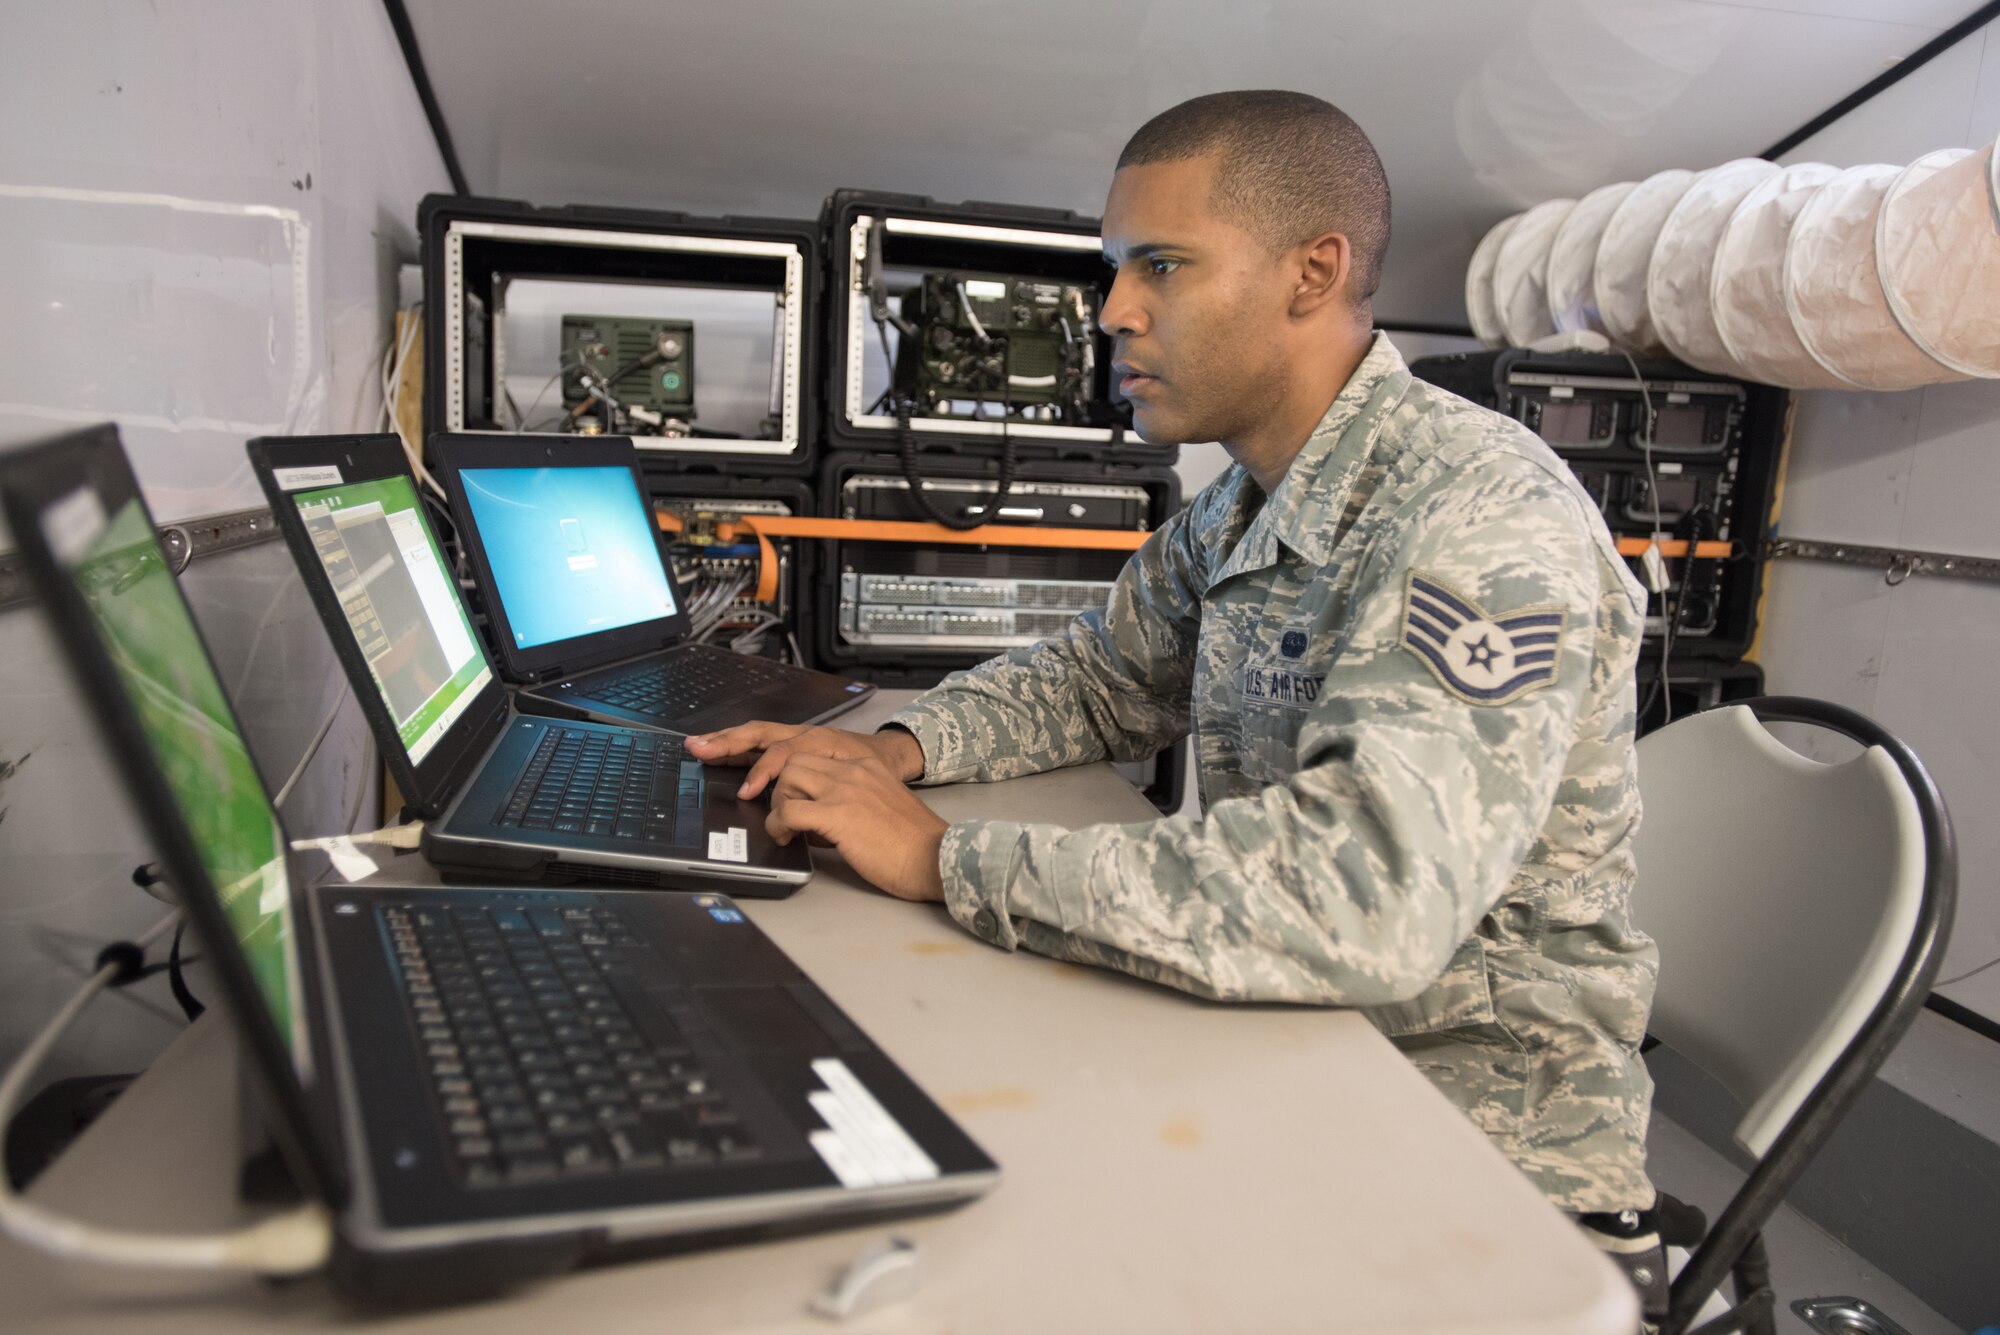 Staff Sgt. Jose Romero, a cyber systems operations technician for the Puerto Rico Air National Guard’s 156th Airlift Wing, sets up satellite communications at Paducah Tilghman High School in Paducah, Ky., July 16, 2016, in preparation for Bluegrass Medical Innovative Readiness Training. The program will offer medical and dental care at no cost to residents in three Western Kentucky locations from July 18 to 27. (U.S. Air National Guard photo by Master Sgt. Phil Speck)